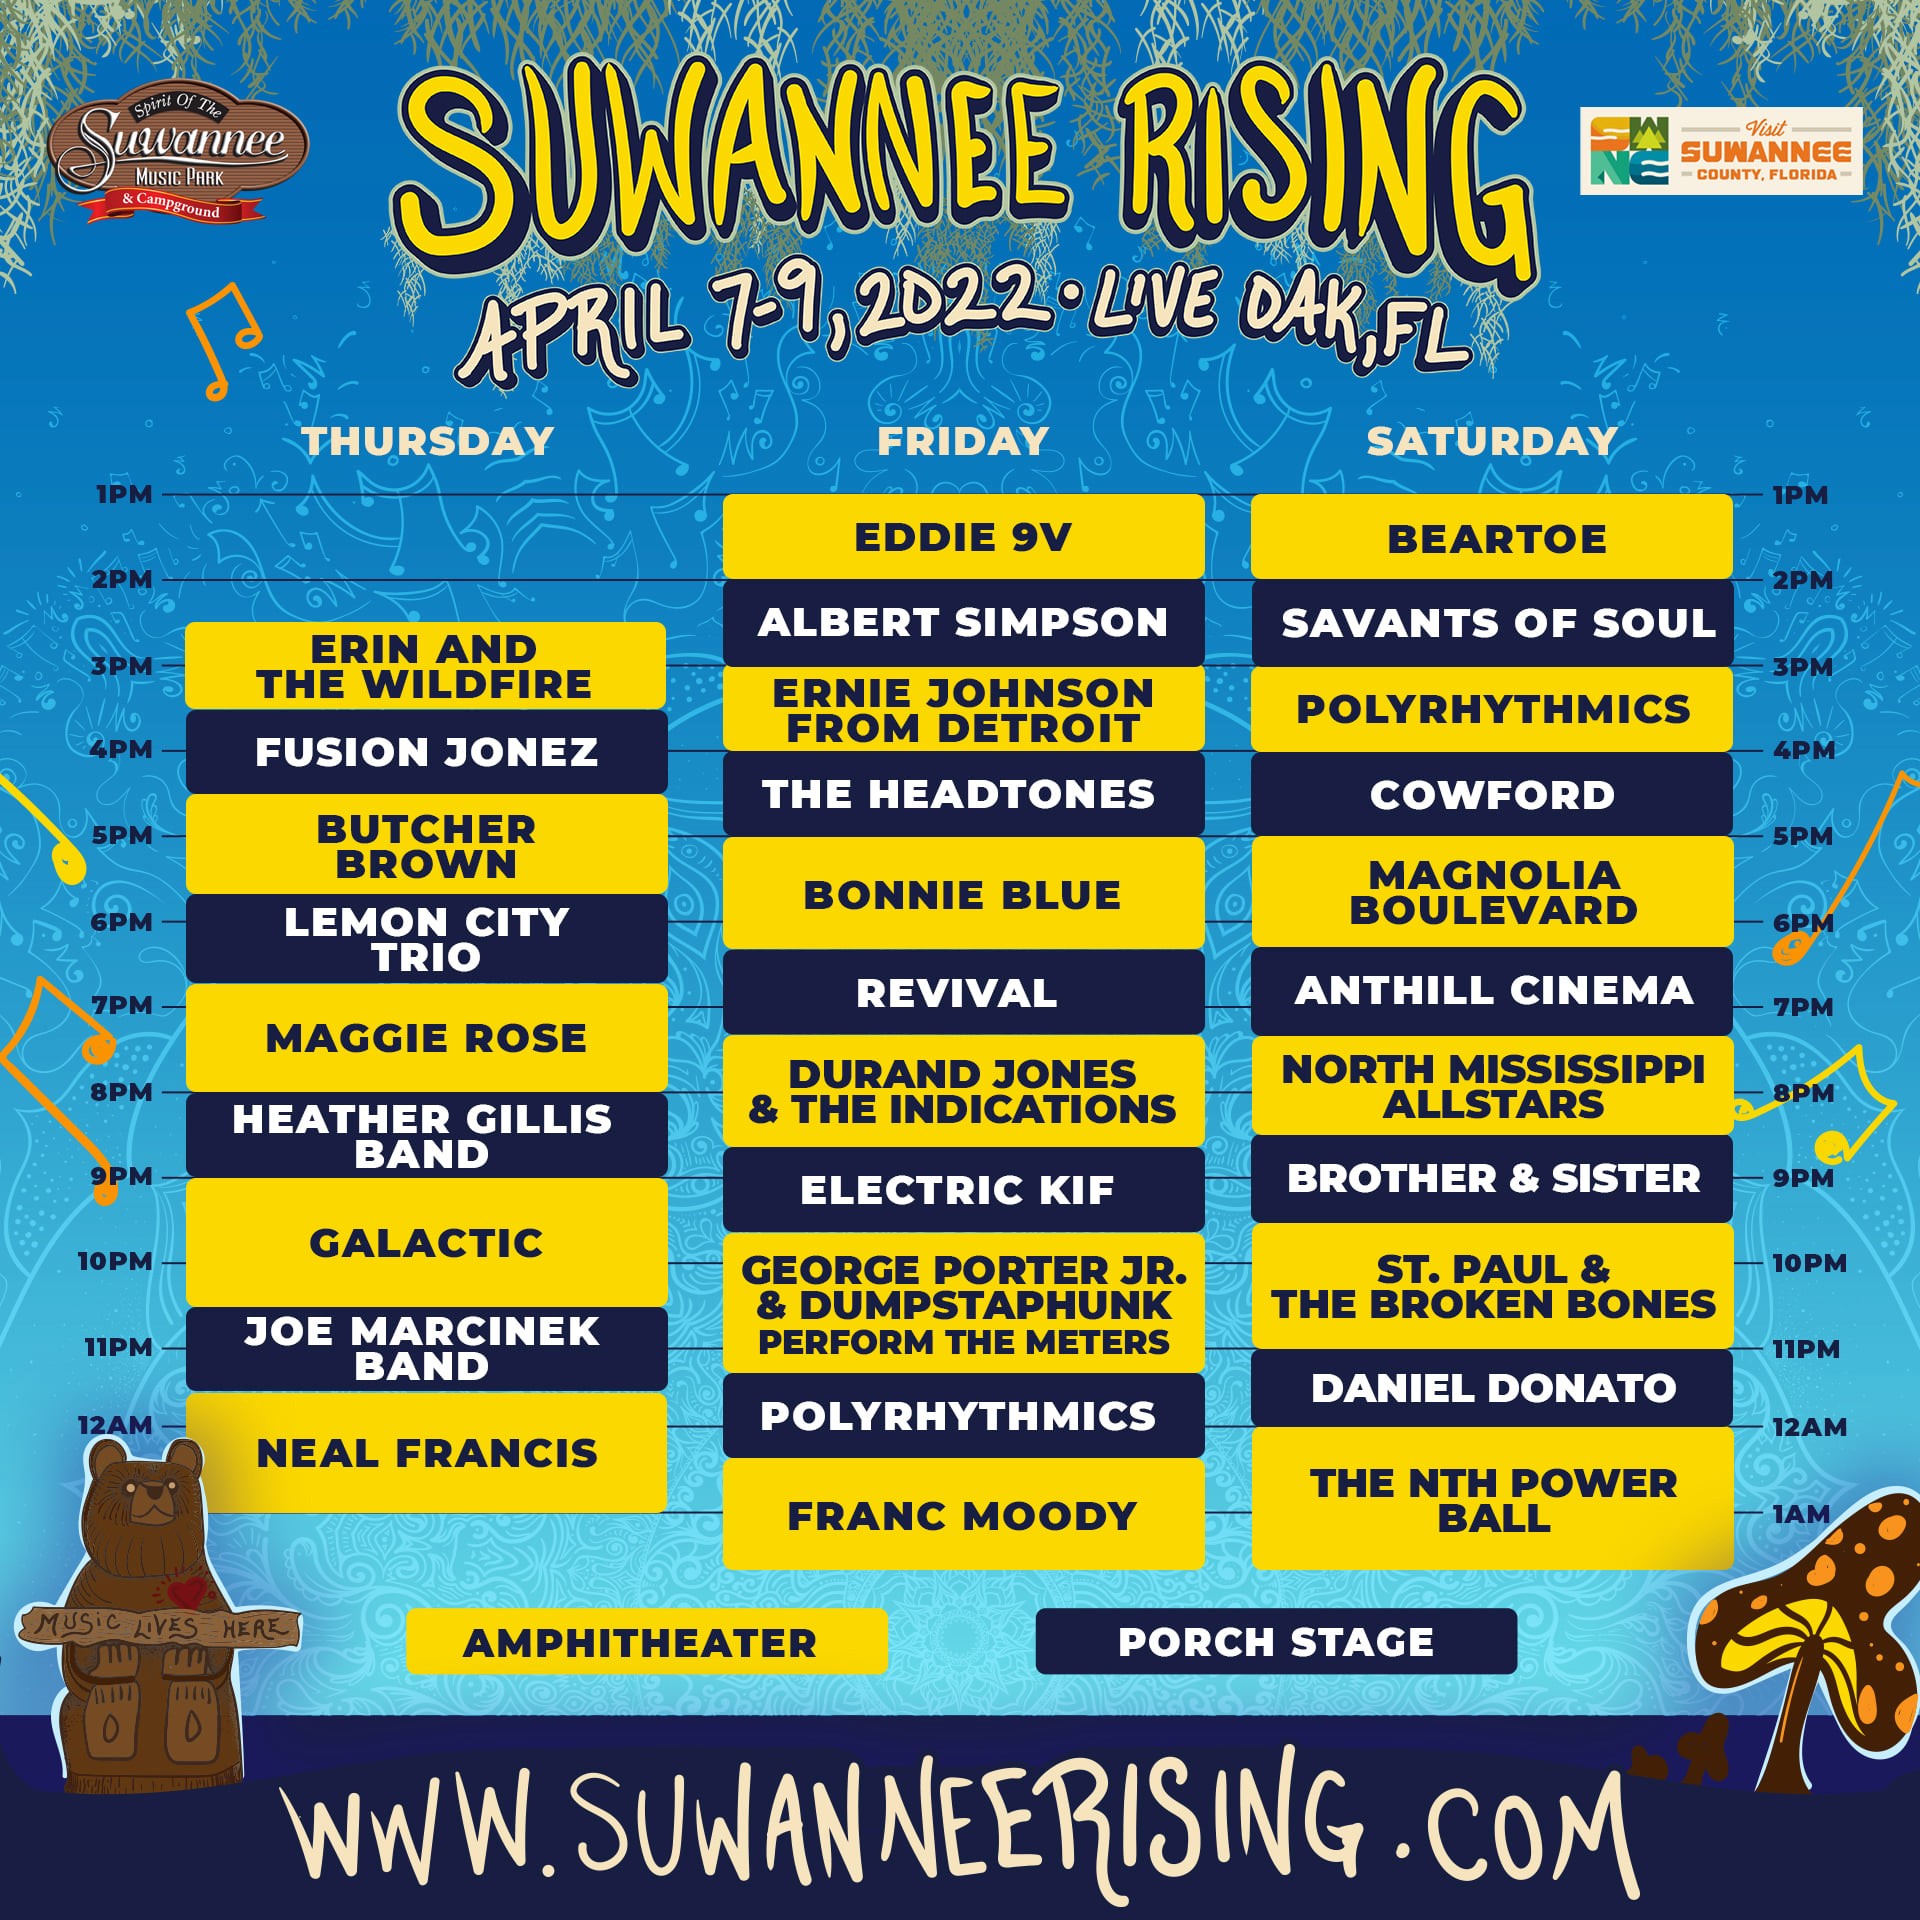 Suwannee Rising 2022 Releases Schedule with St. Paul and the Broken Bones, Durand Jones & The Indications